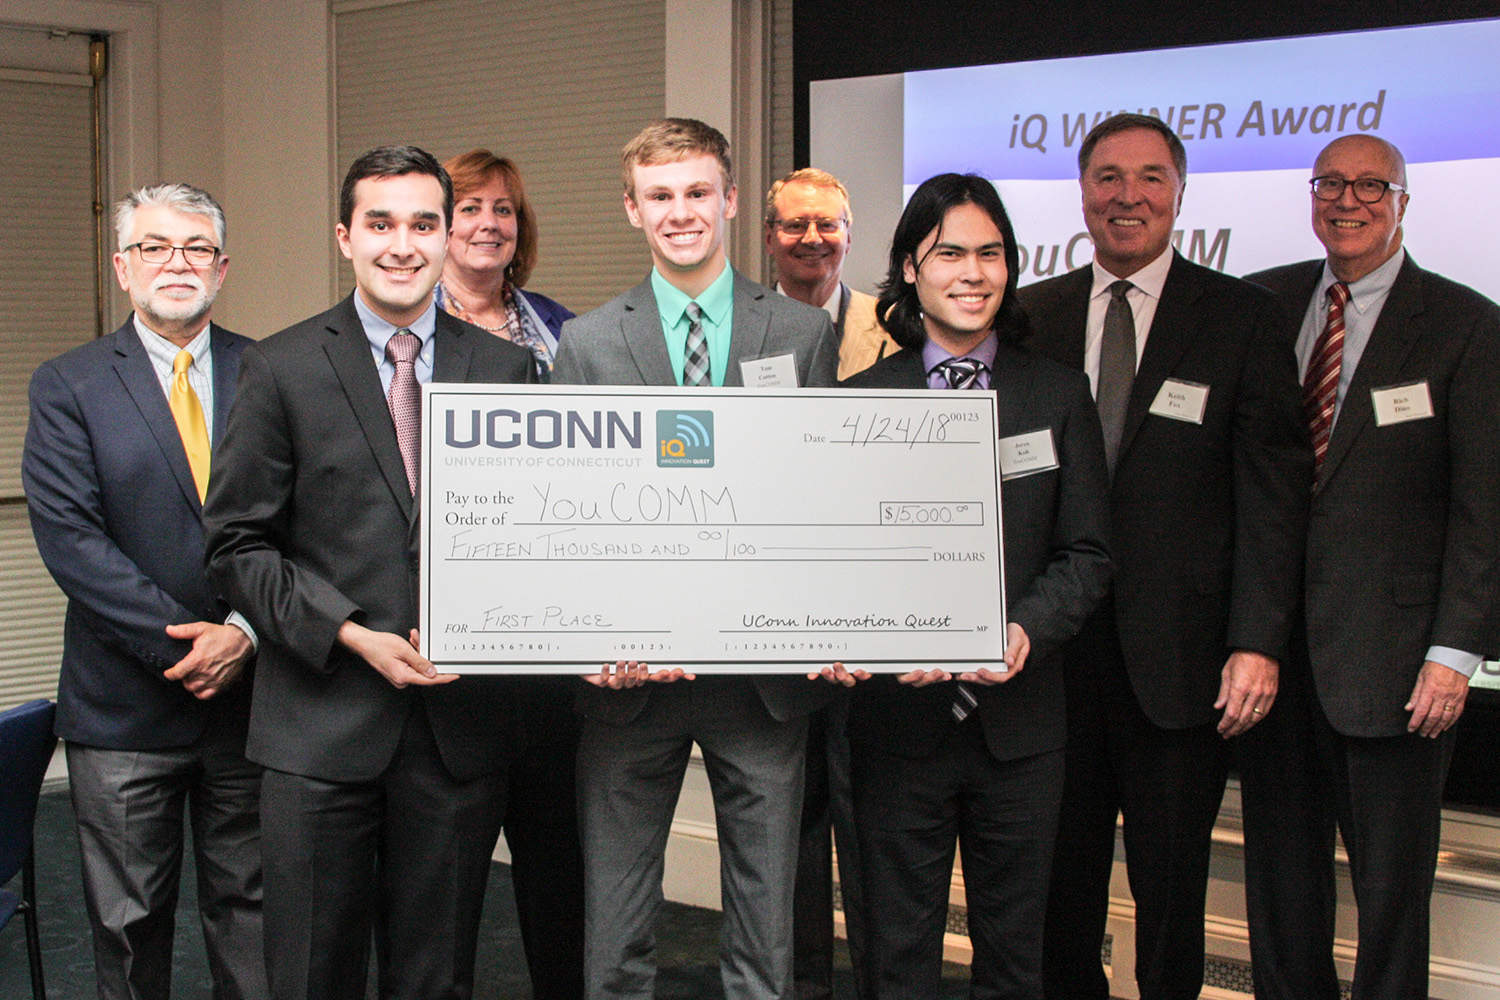 From left, Kazem Kazerounian, dean of the School of Engineering; YouCOMM co-founder Daniel Yasoshima; Lucy Gilson, head of the Management Department; YouCOMM co-founder Tom Cotton; Provost Craig Kennedy; student Jeren Koh; UConn iQ founder Keith Fox '80 and iQ Director Professor Rich Dino pose for a photo after the announcement that YouCOMM won the grand prize. (Nicolle Anderson/UConn School of Business)